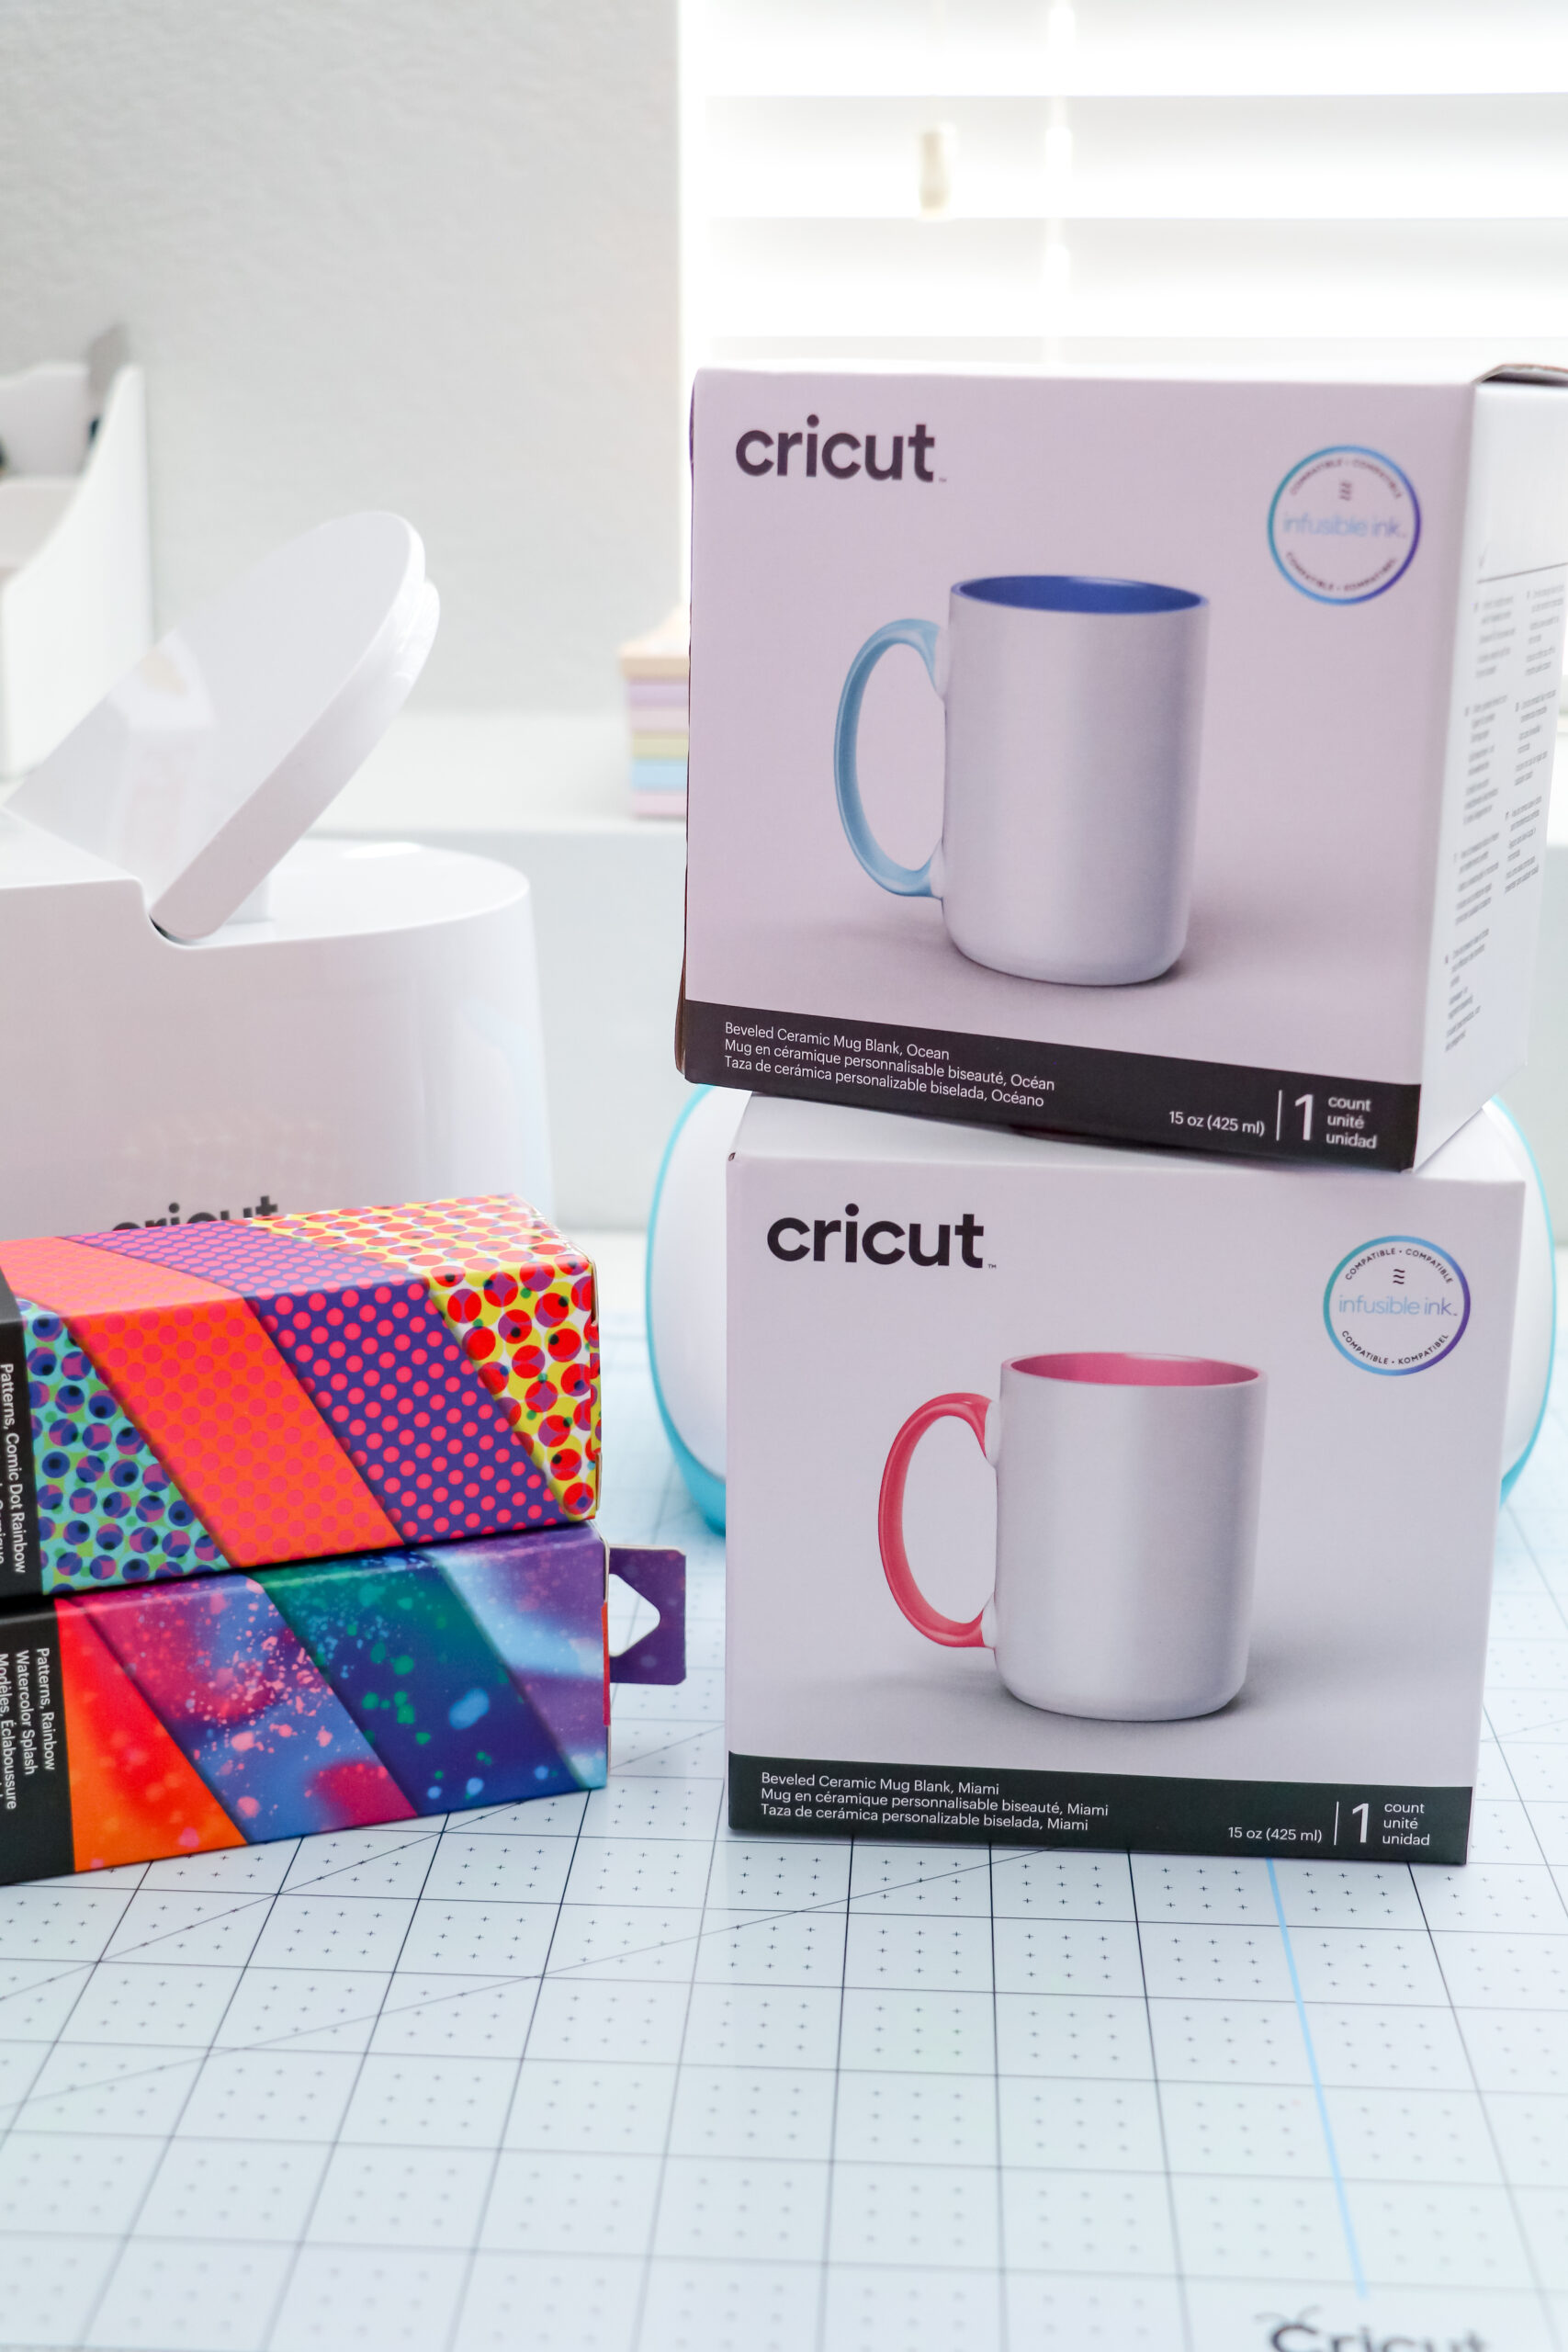 HOW TO PERSONALIZE MUGS WITH CRICUT